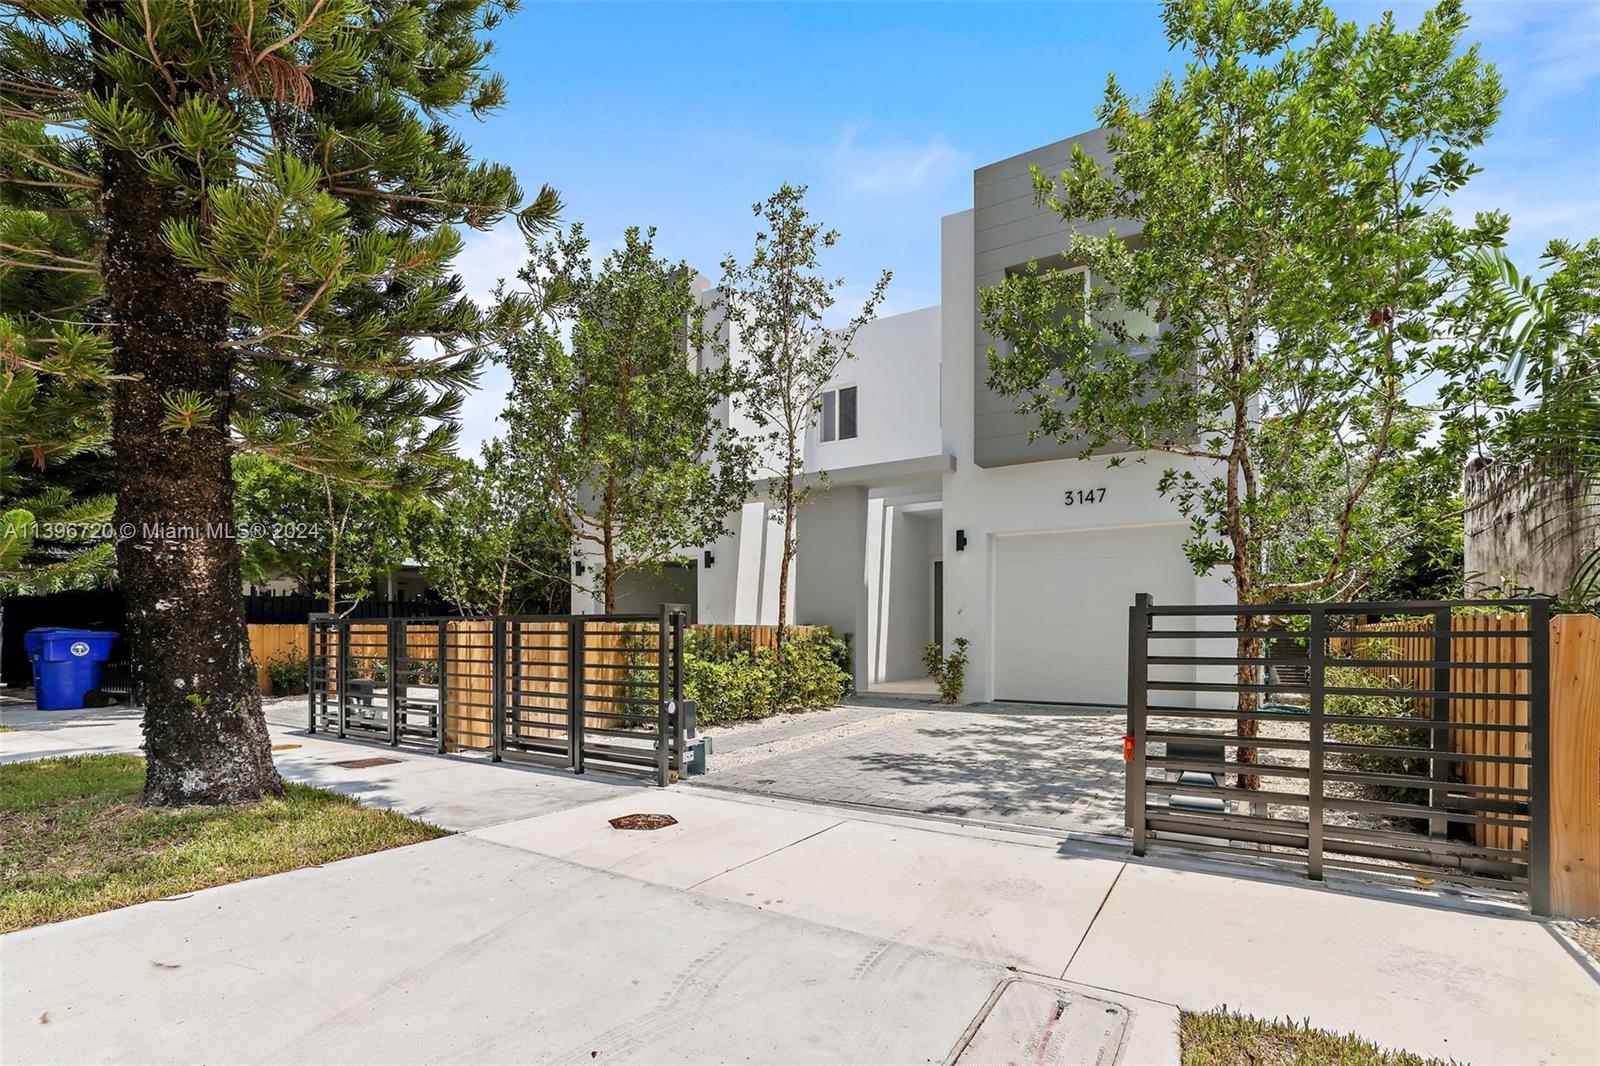 Spectacular Brand New Construction in Coconut Grove.  This home has 4 Bedrooms and 4 Baths with 1 car garage, tile floors, high ceilings, a modern kitchen, quartz countertops, Sub-Zero, and Wolf Appliances. 2nd floor Laundry closet on the 2nd floor.  The patio has a covered terrace, and the pool is great for entertaining. 
Call the listing agent for showing instructions.